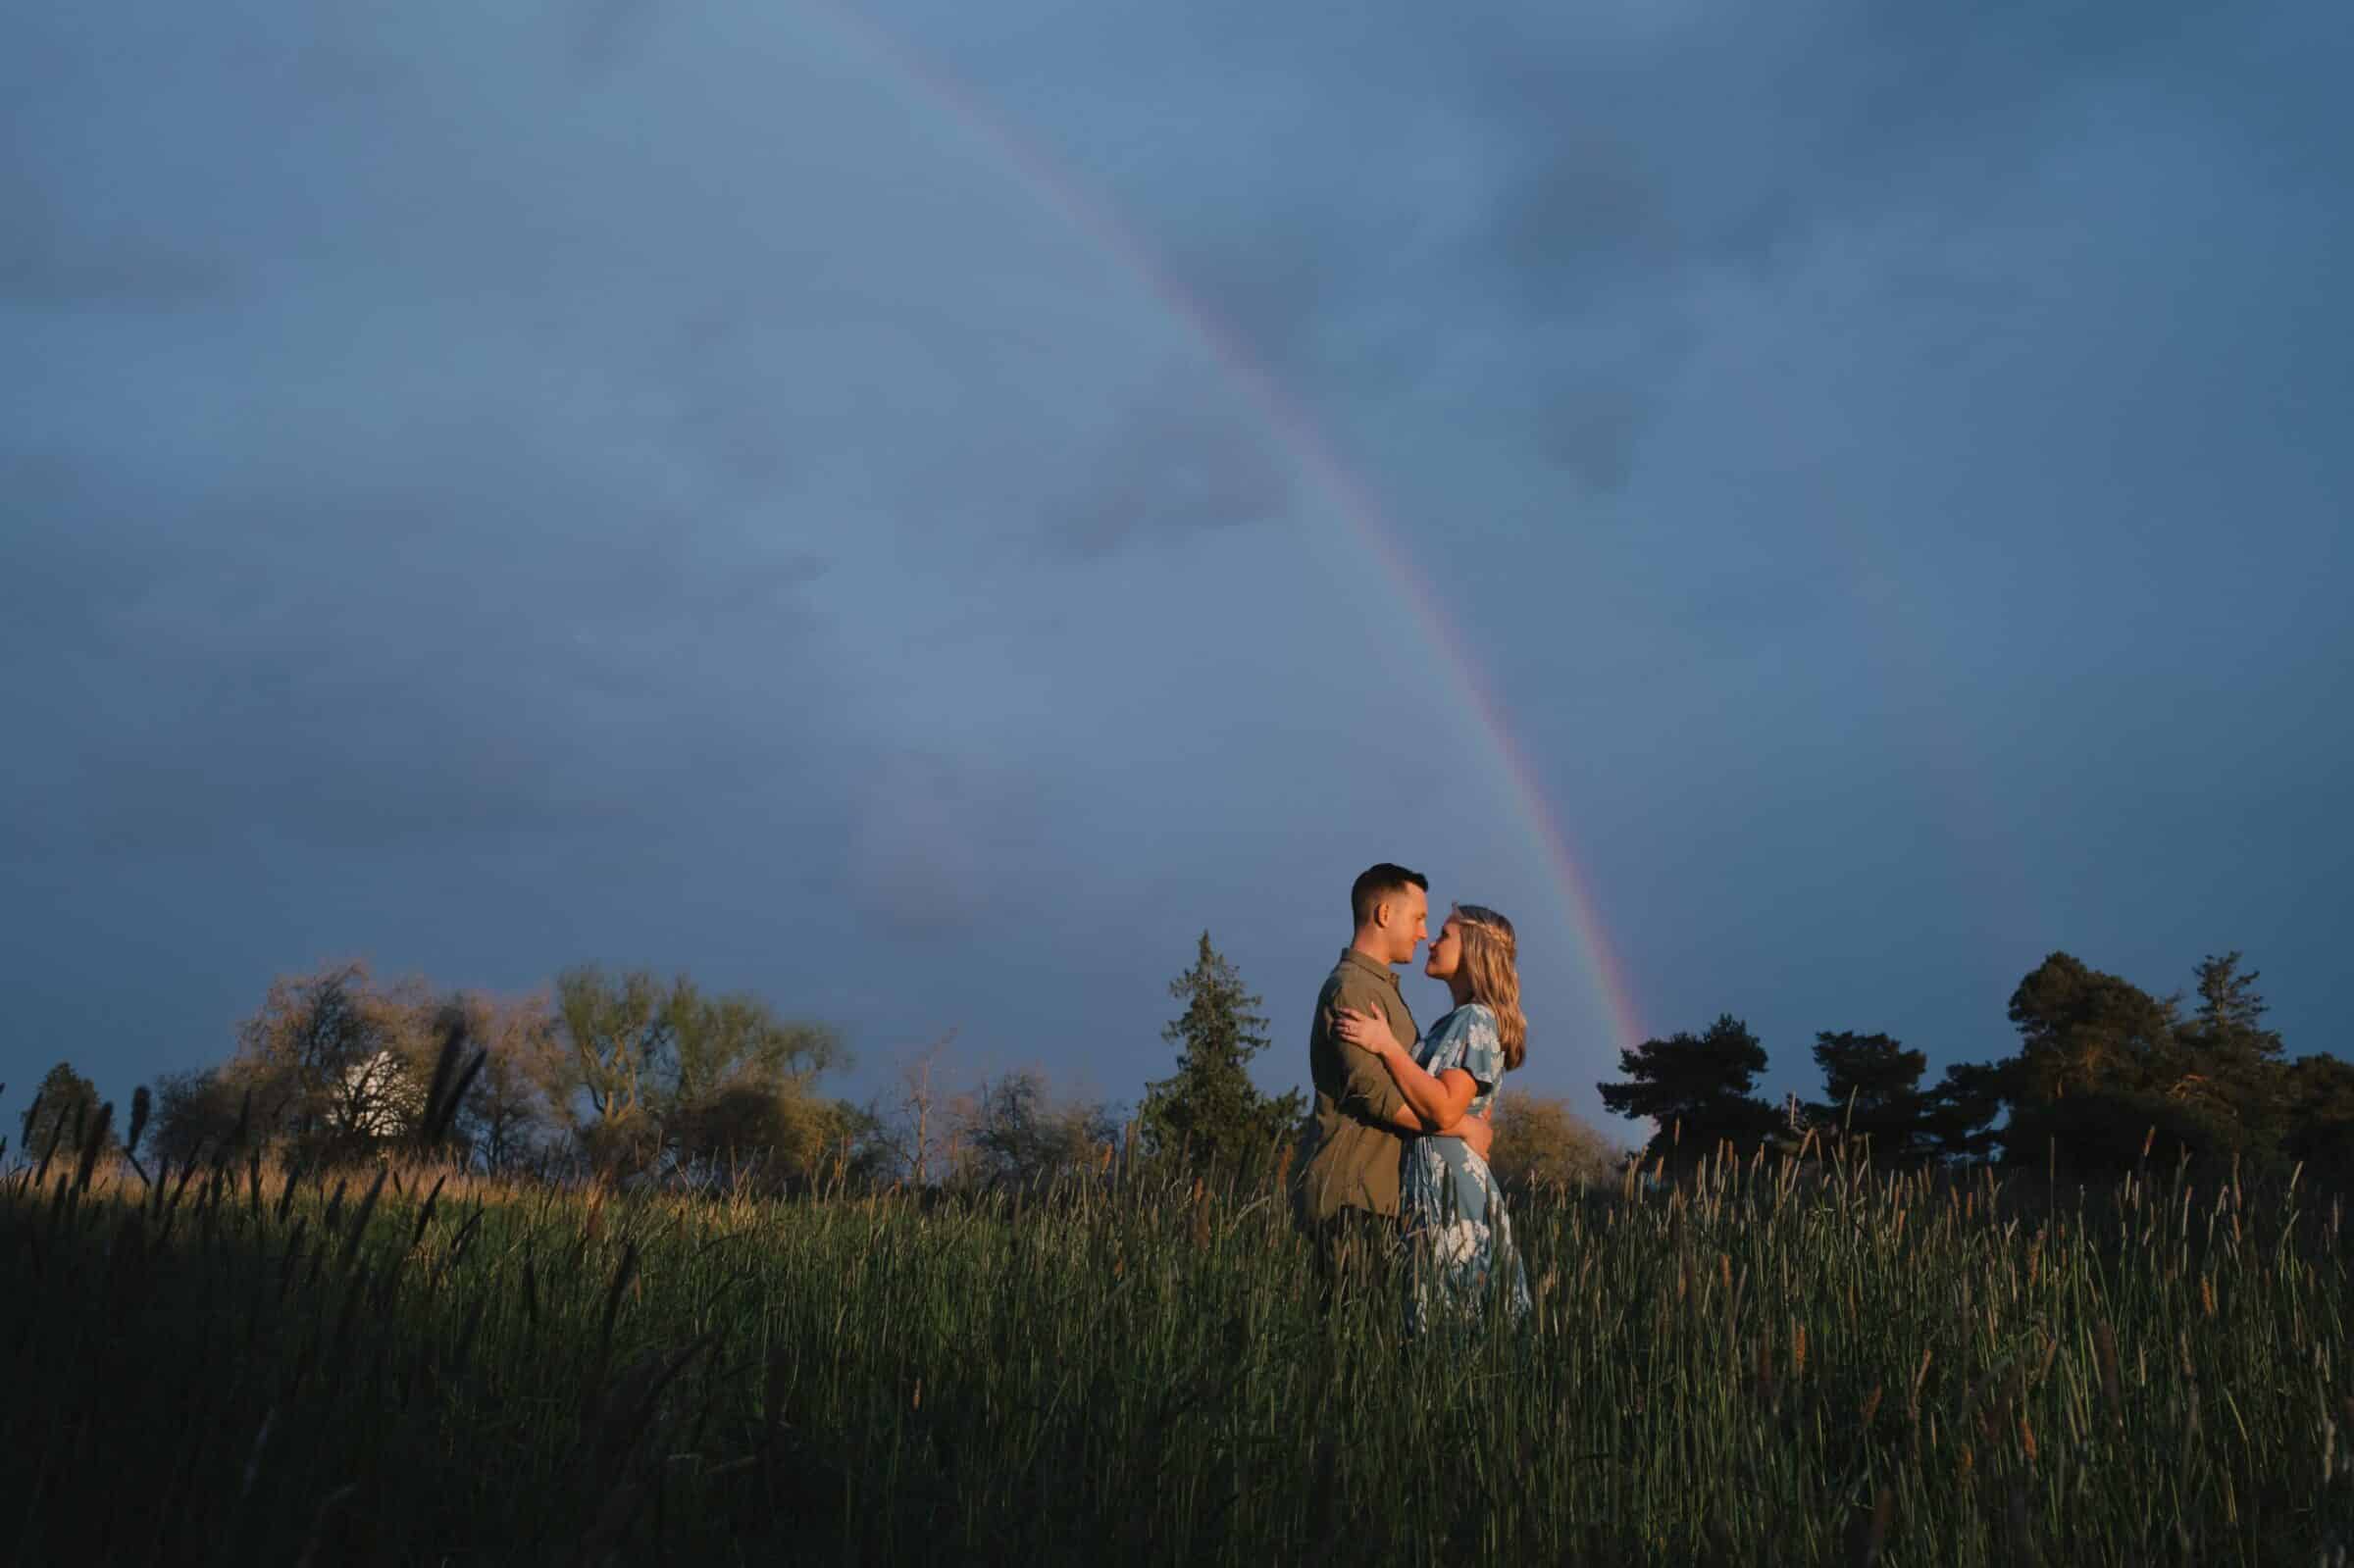 Engagement photo in Discovery Park Seattle in the grassy field and rainbow visible in the distance.